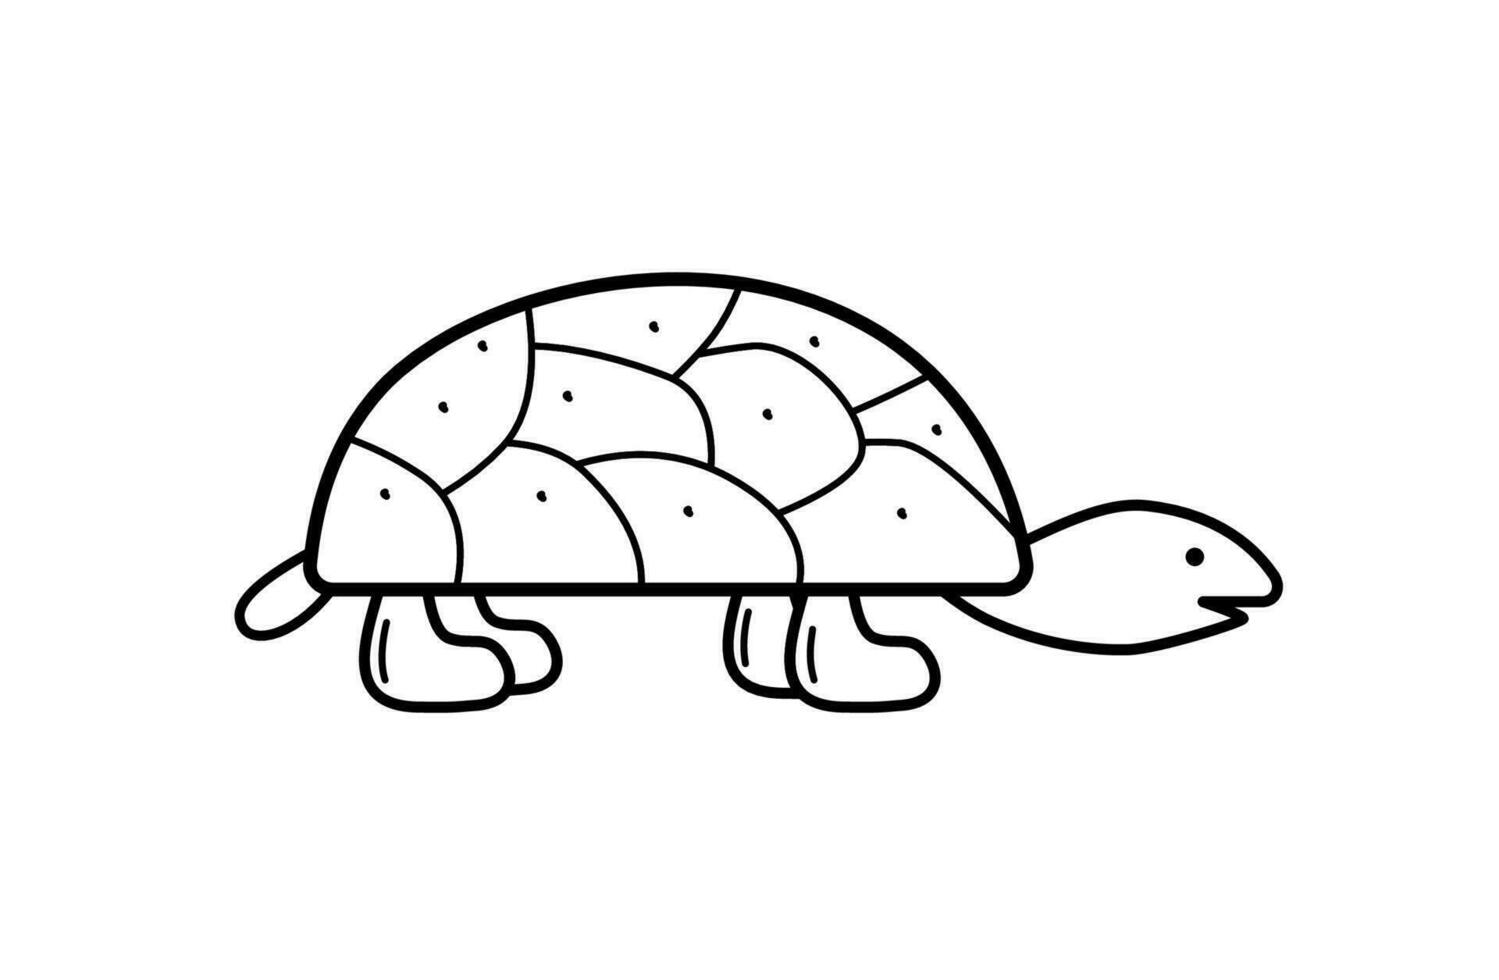 Turtle icon. Vector doodle illustration of a sea animal turtle. Isolate on white.